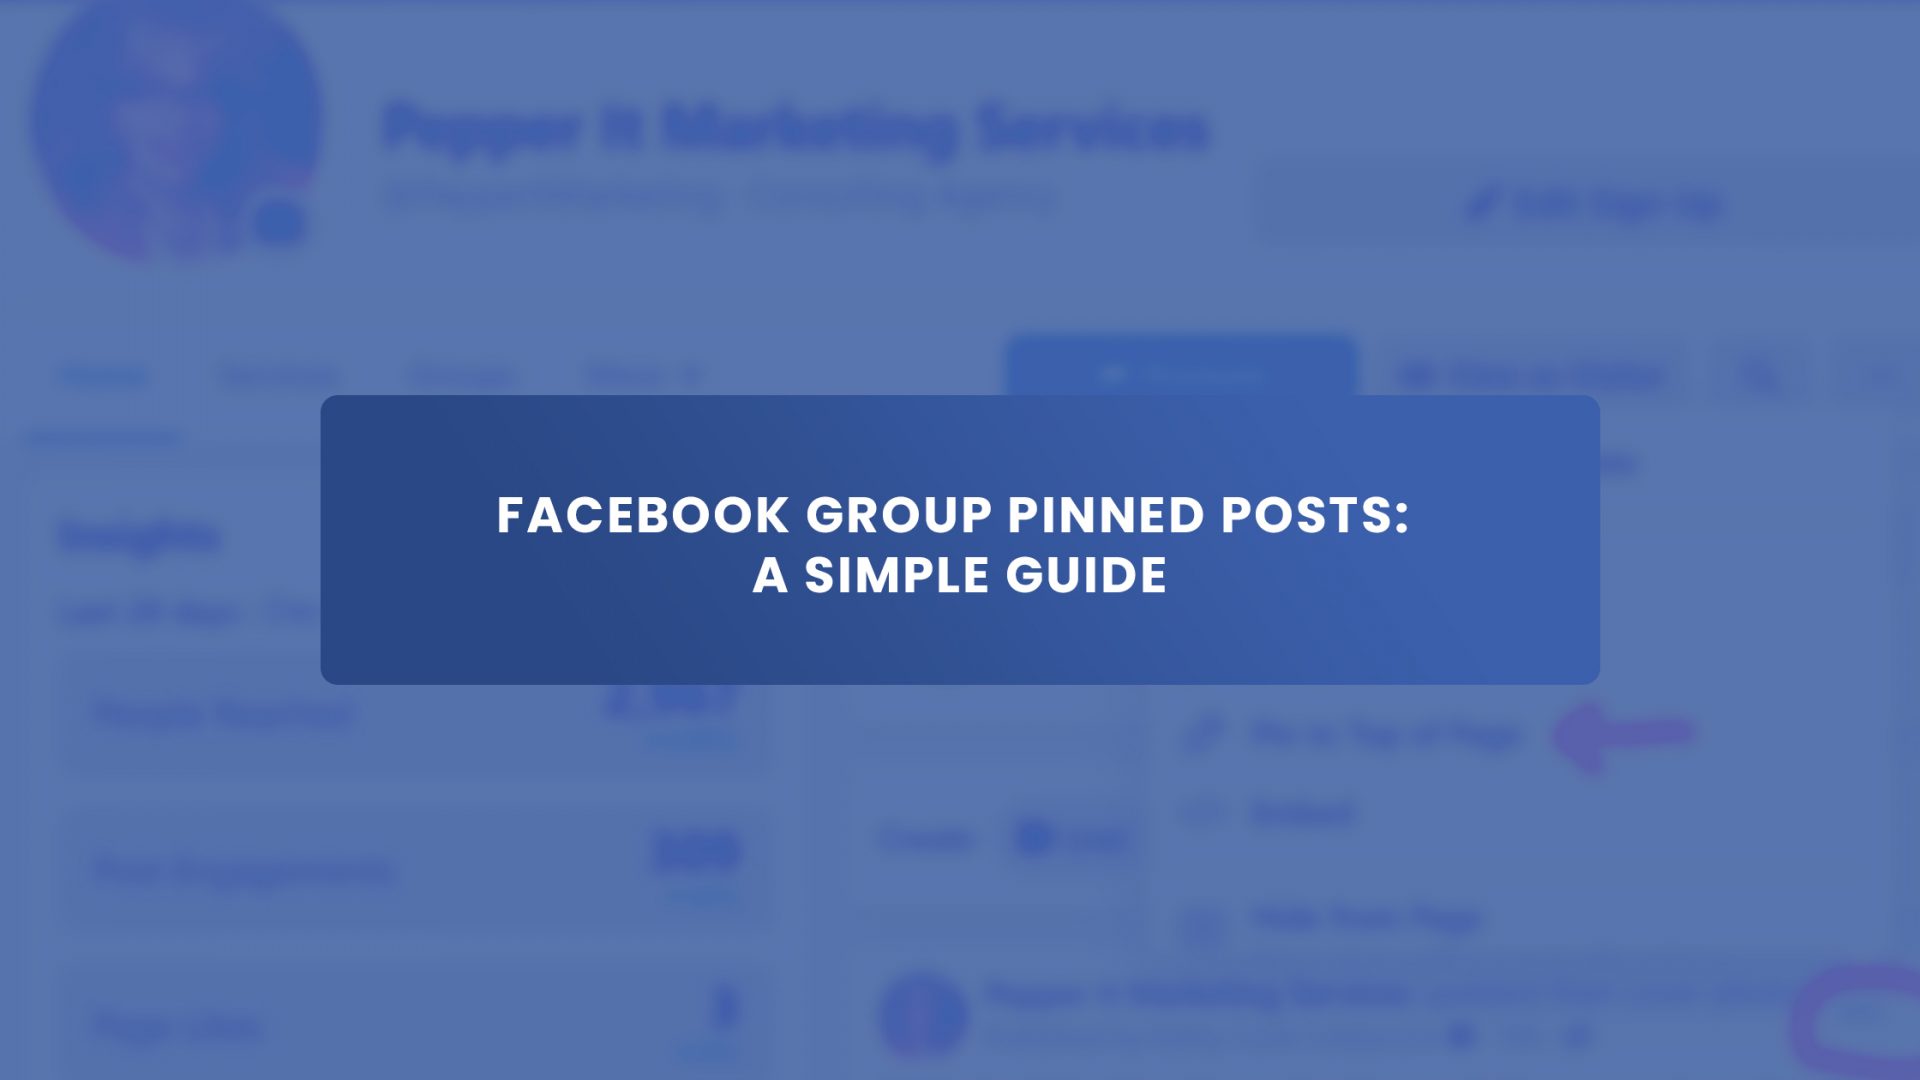 Facebook group pinned posts